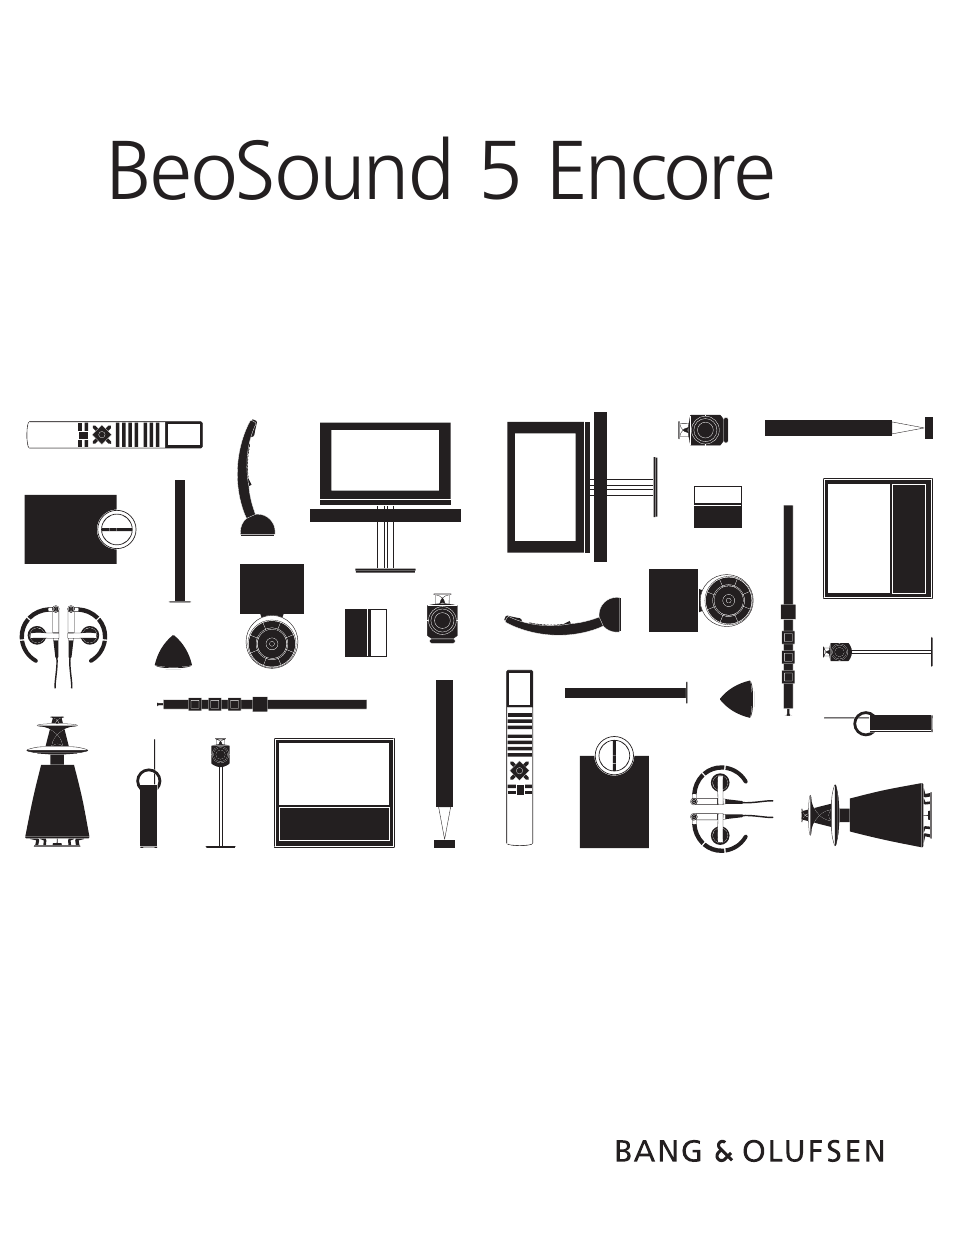 BeoSound 5 Encore - Getting Started